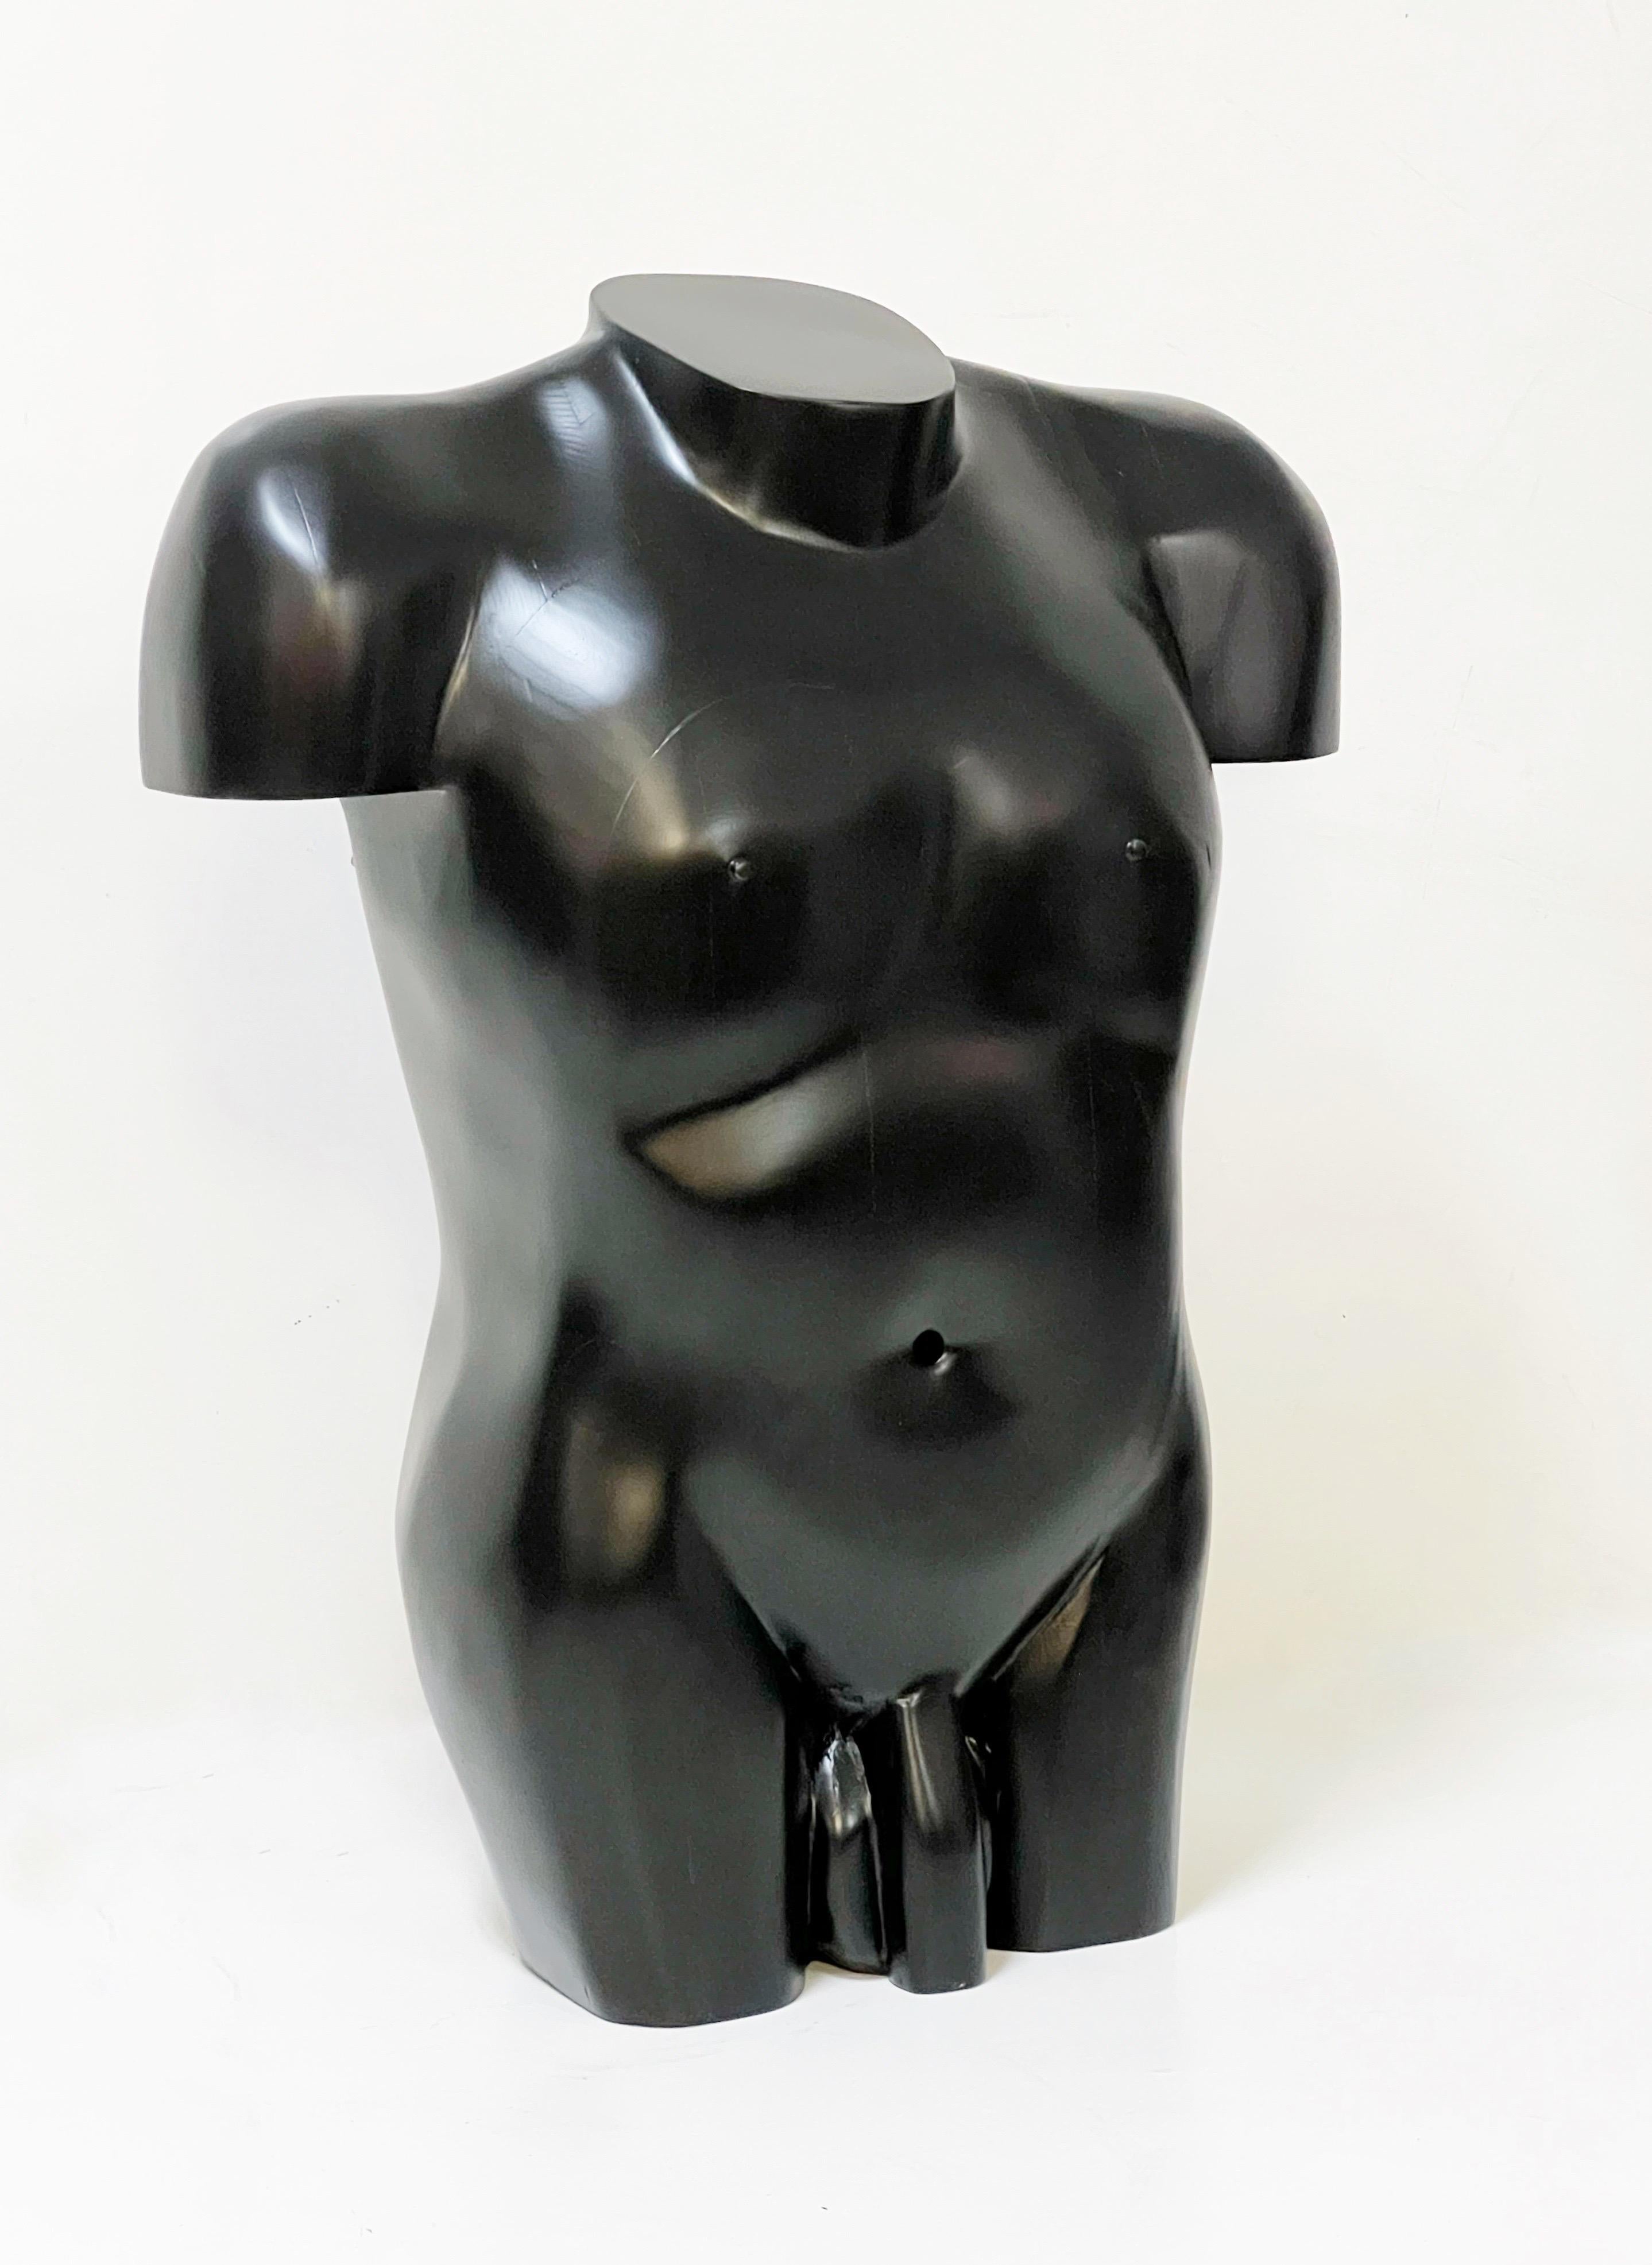 American Modern Wood Sculpture of Nude, Average Man 1970s For Sale